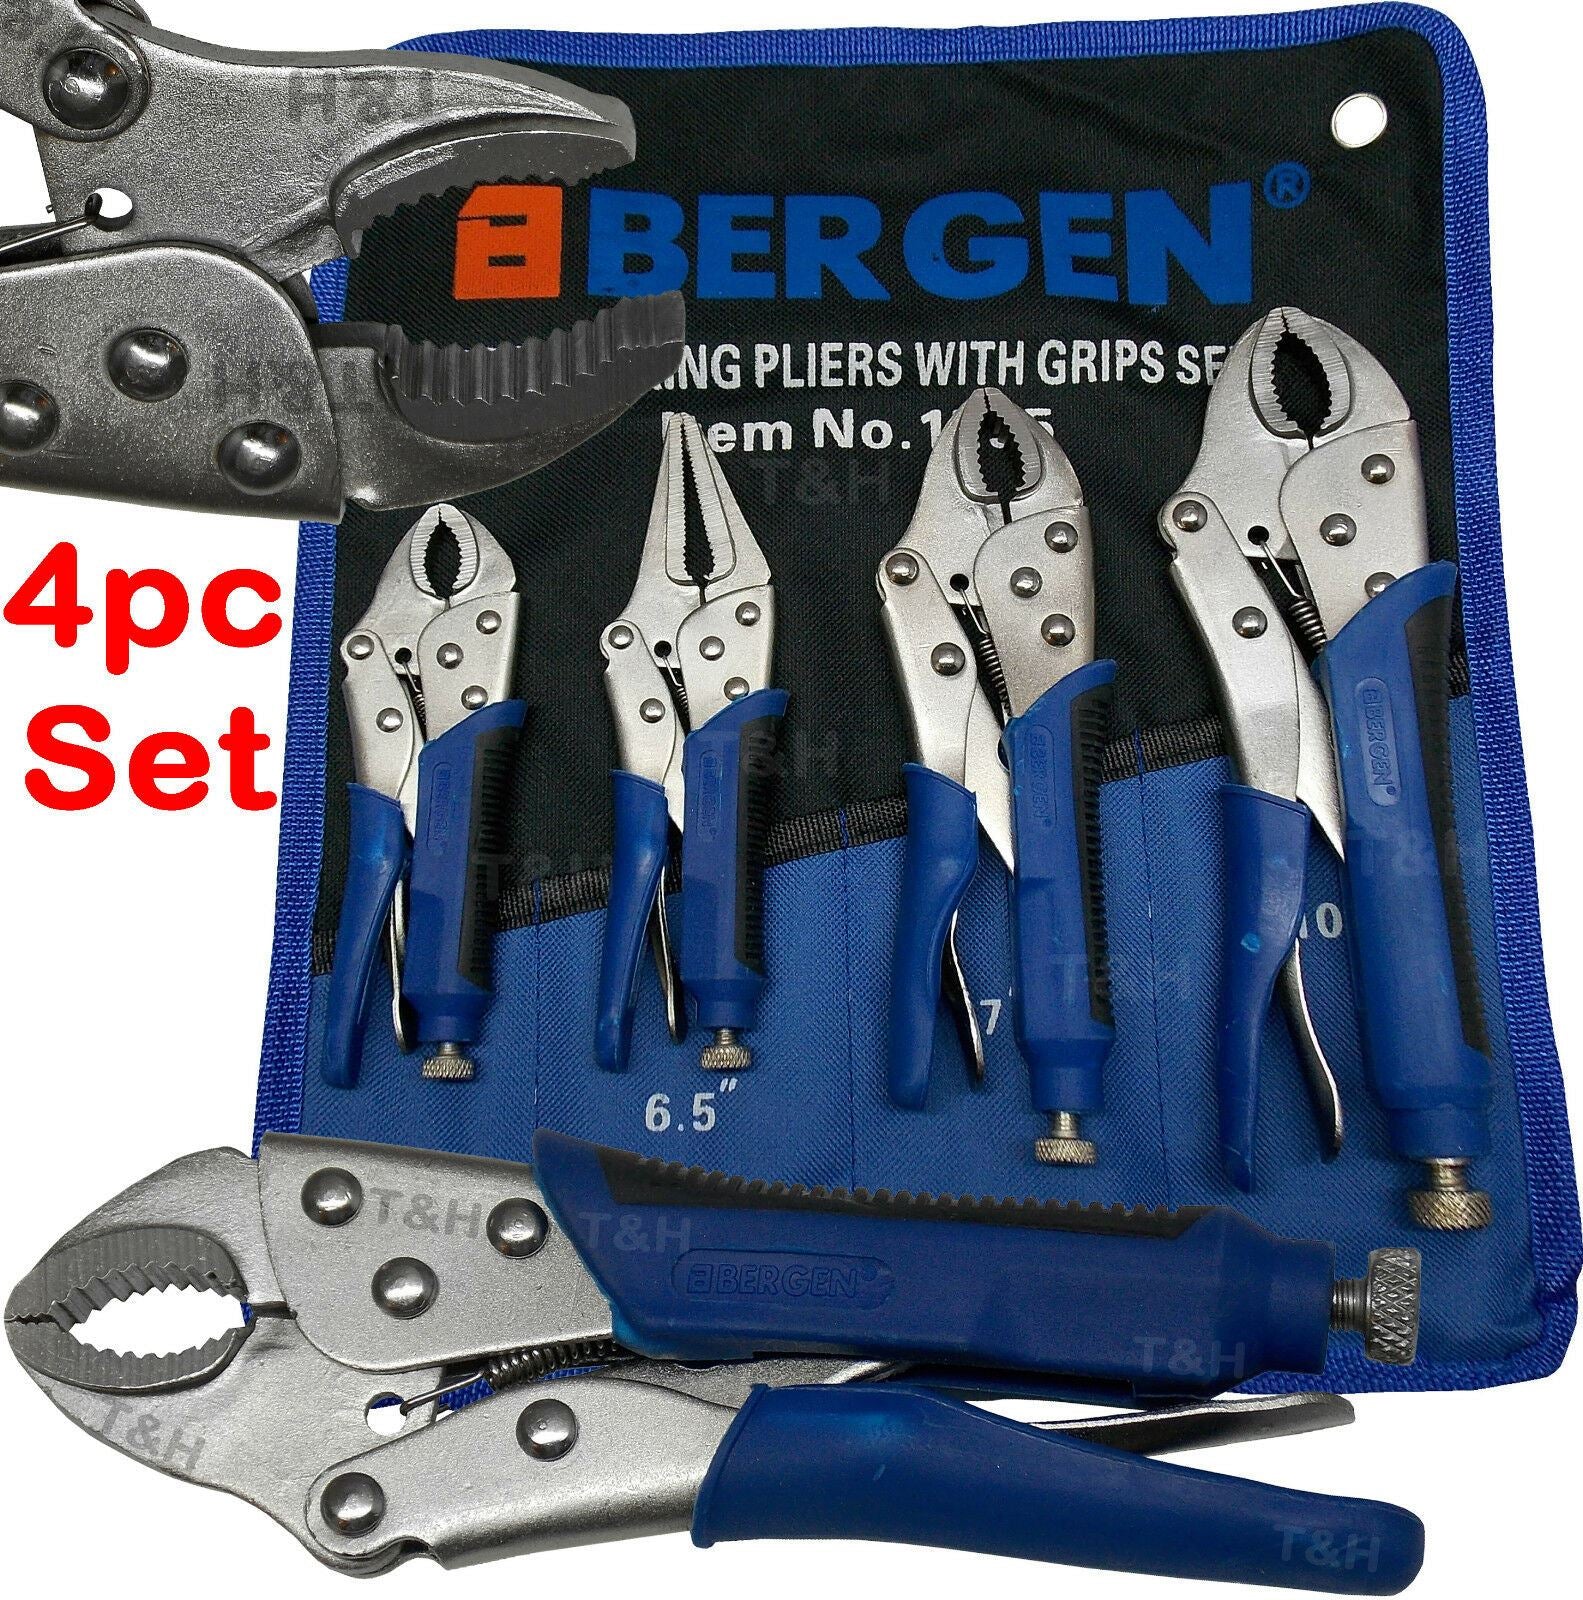 US PRO 4PCS LOCKING PLIERS WITH GRIPS